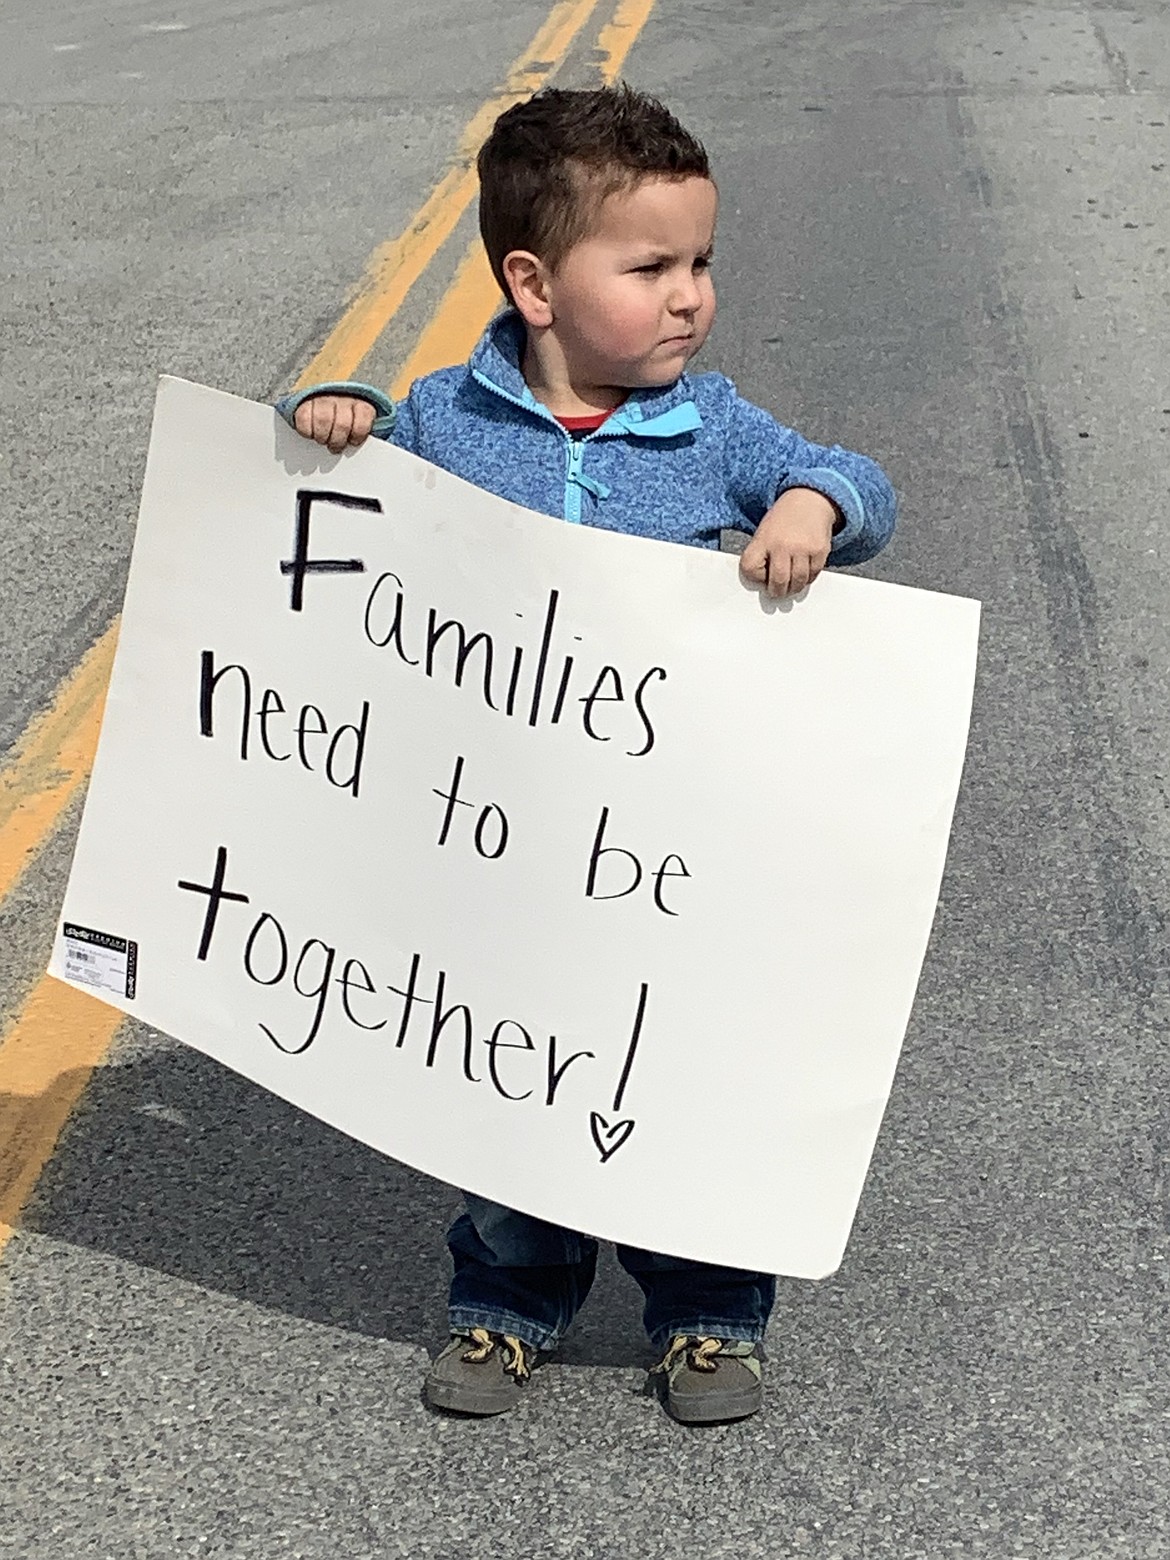 Four-year-old Colt Lynch of Eureka joins the peaceful demonstration at the Port of Roosville Saturday. Lynch's father, Charlie, lives in Canada. (Brandy Carvey photo)